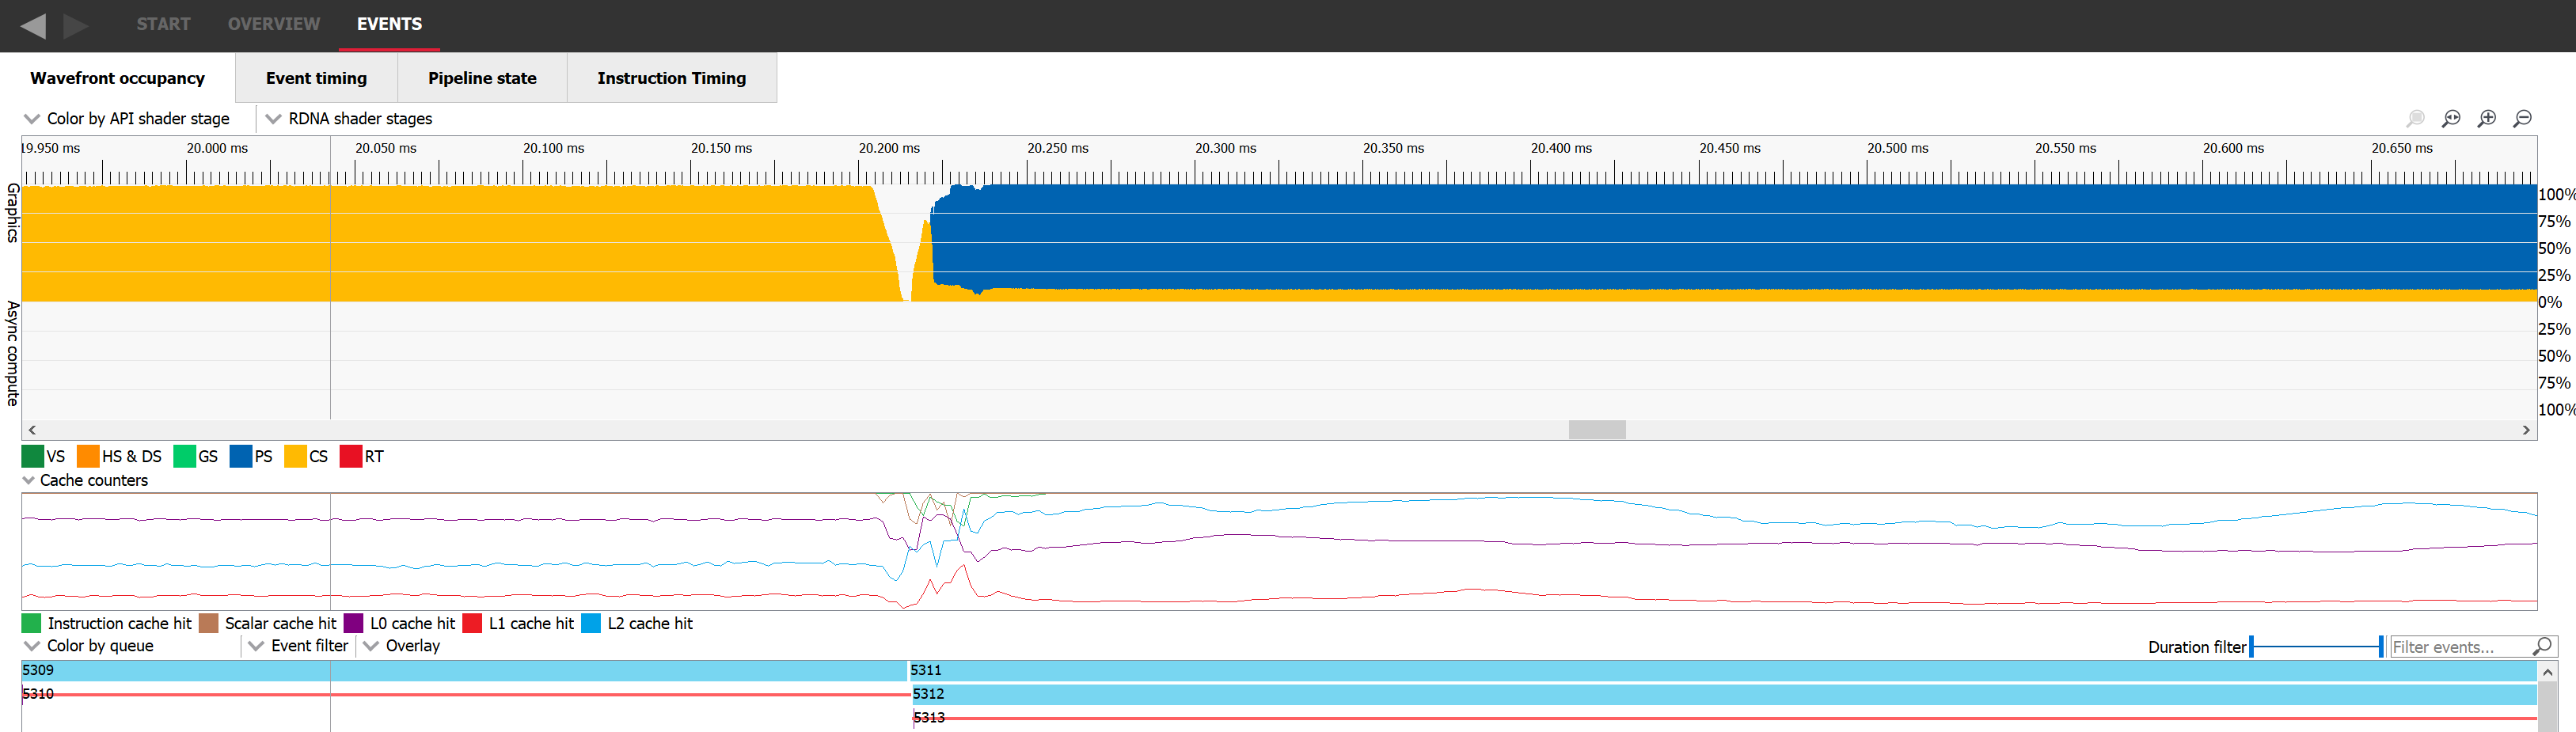 A dispatch and a draw's executions overlapping, visualized in the wavefront occupancy tab of RGP